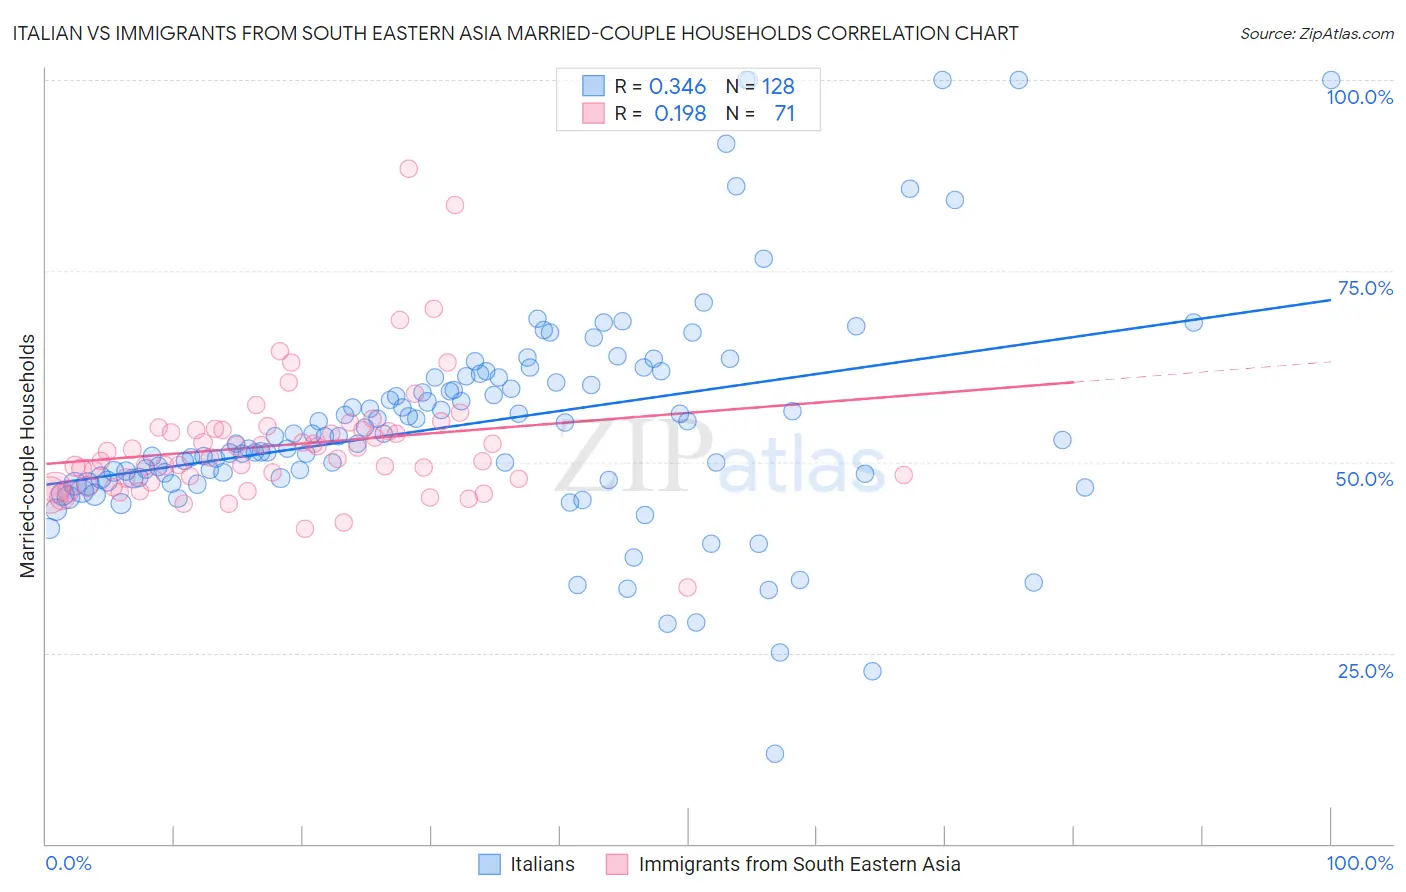 Italian vs Immigrants from South Eastern Asia Married-couple Households